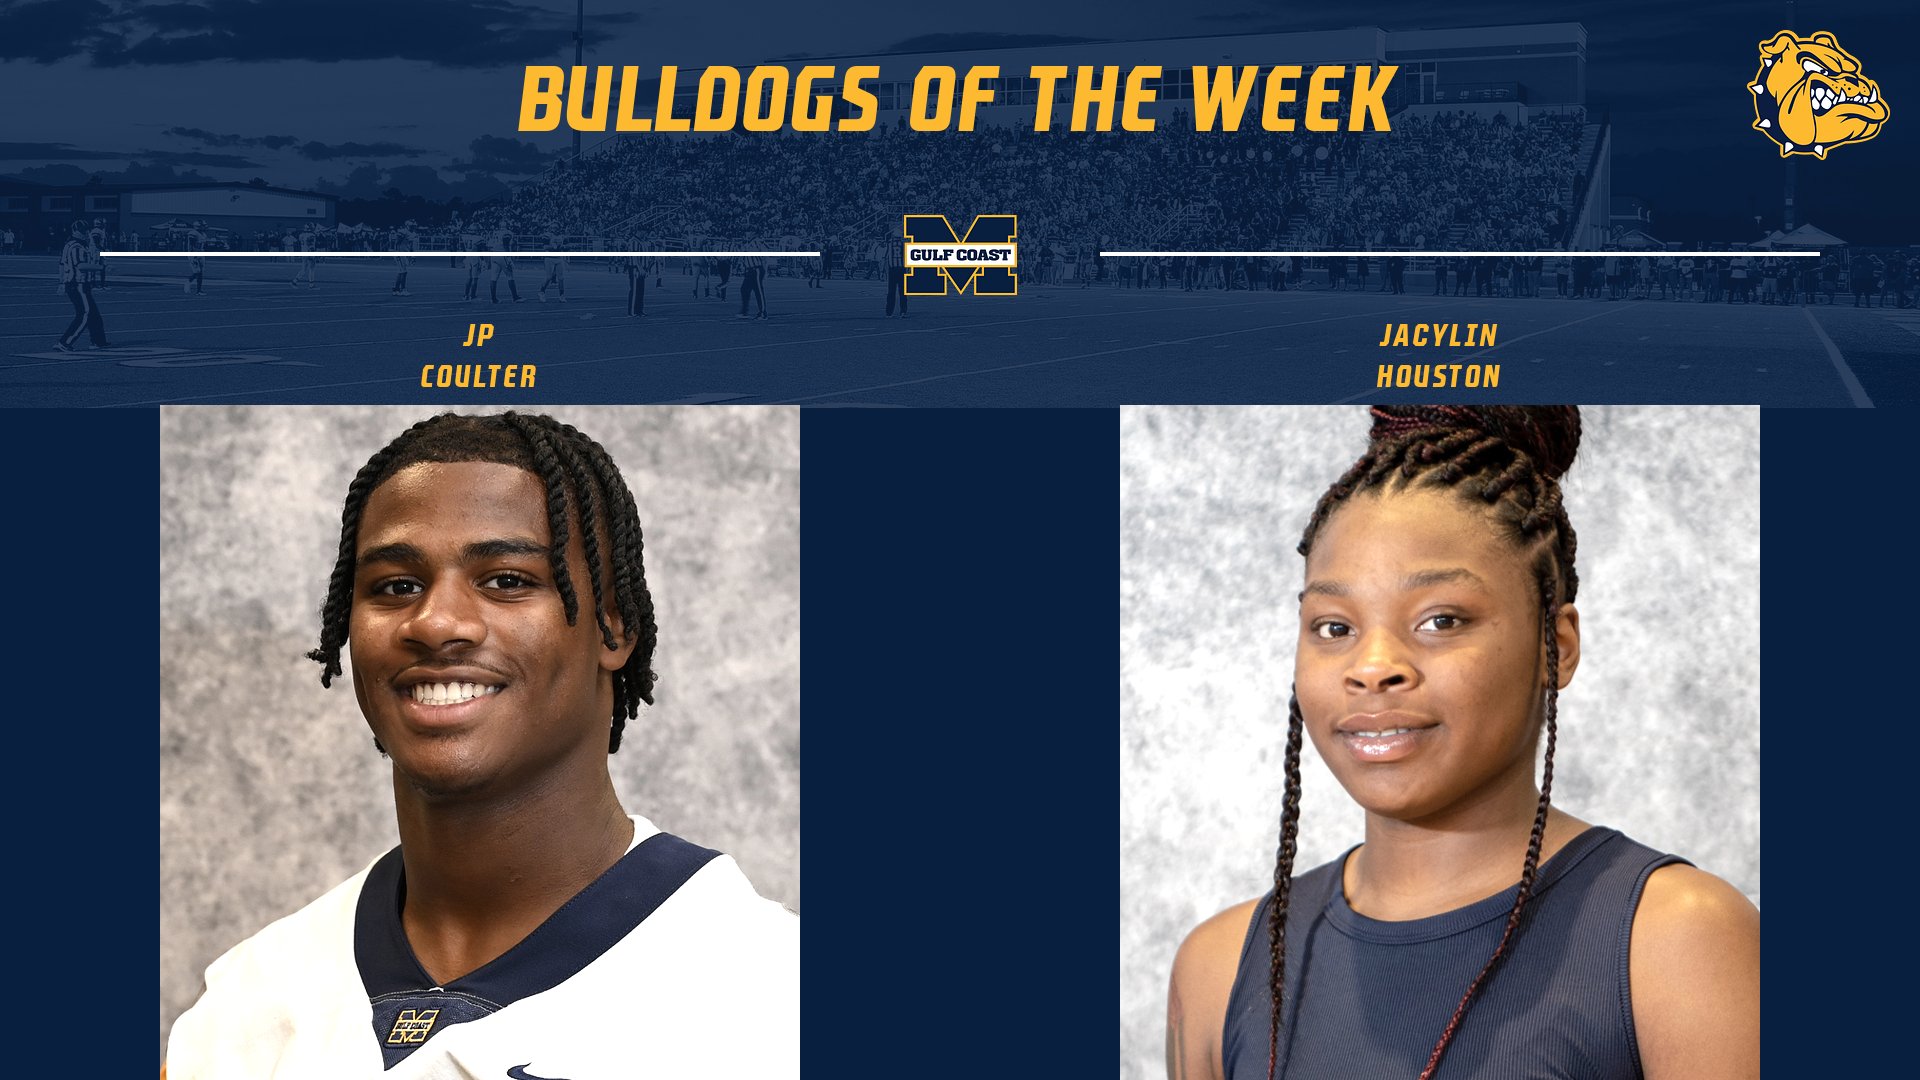 Coulter, Houston named Bulldogs of the Week